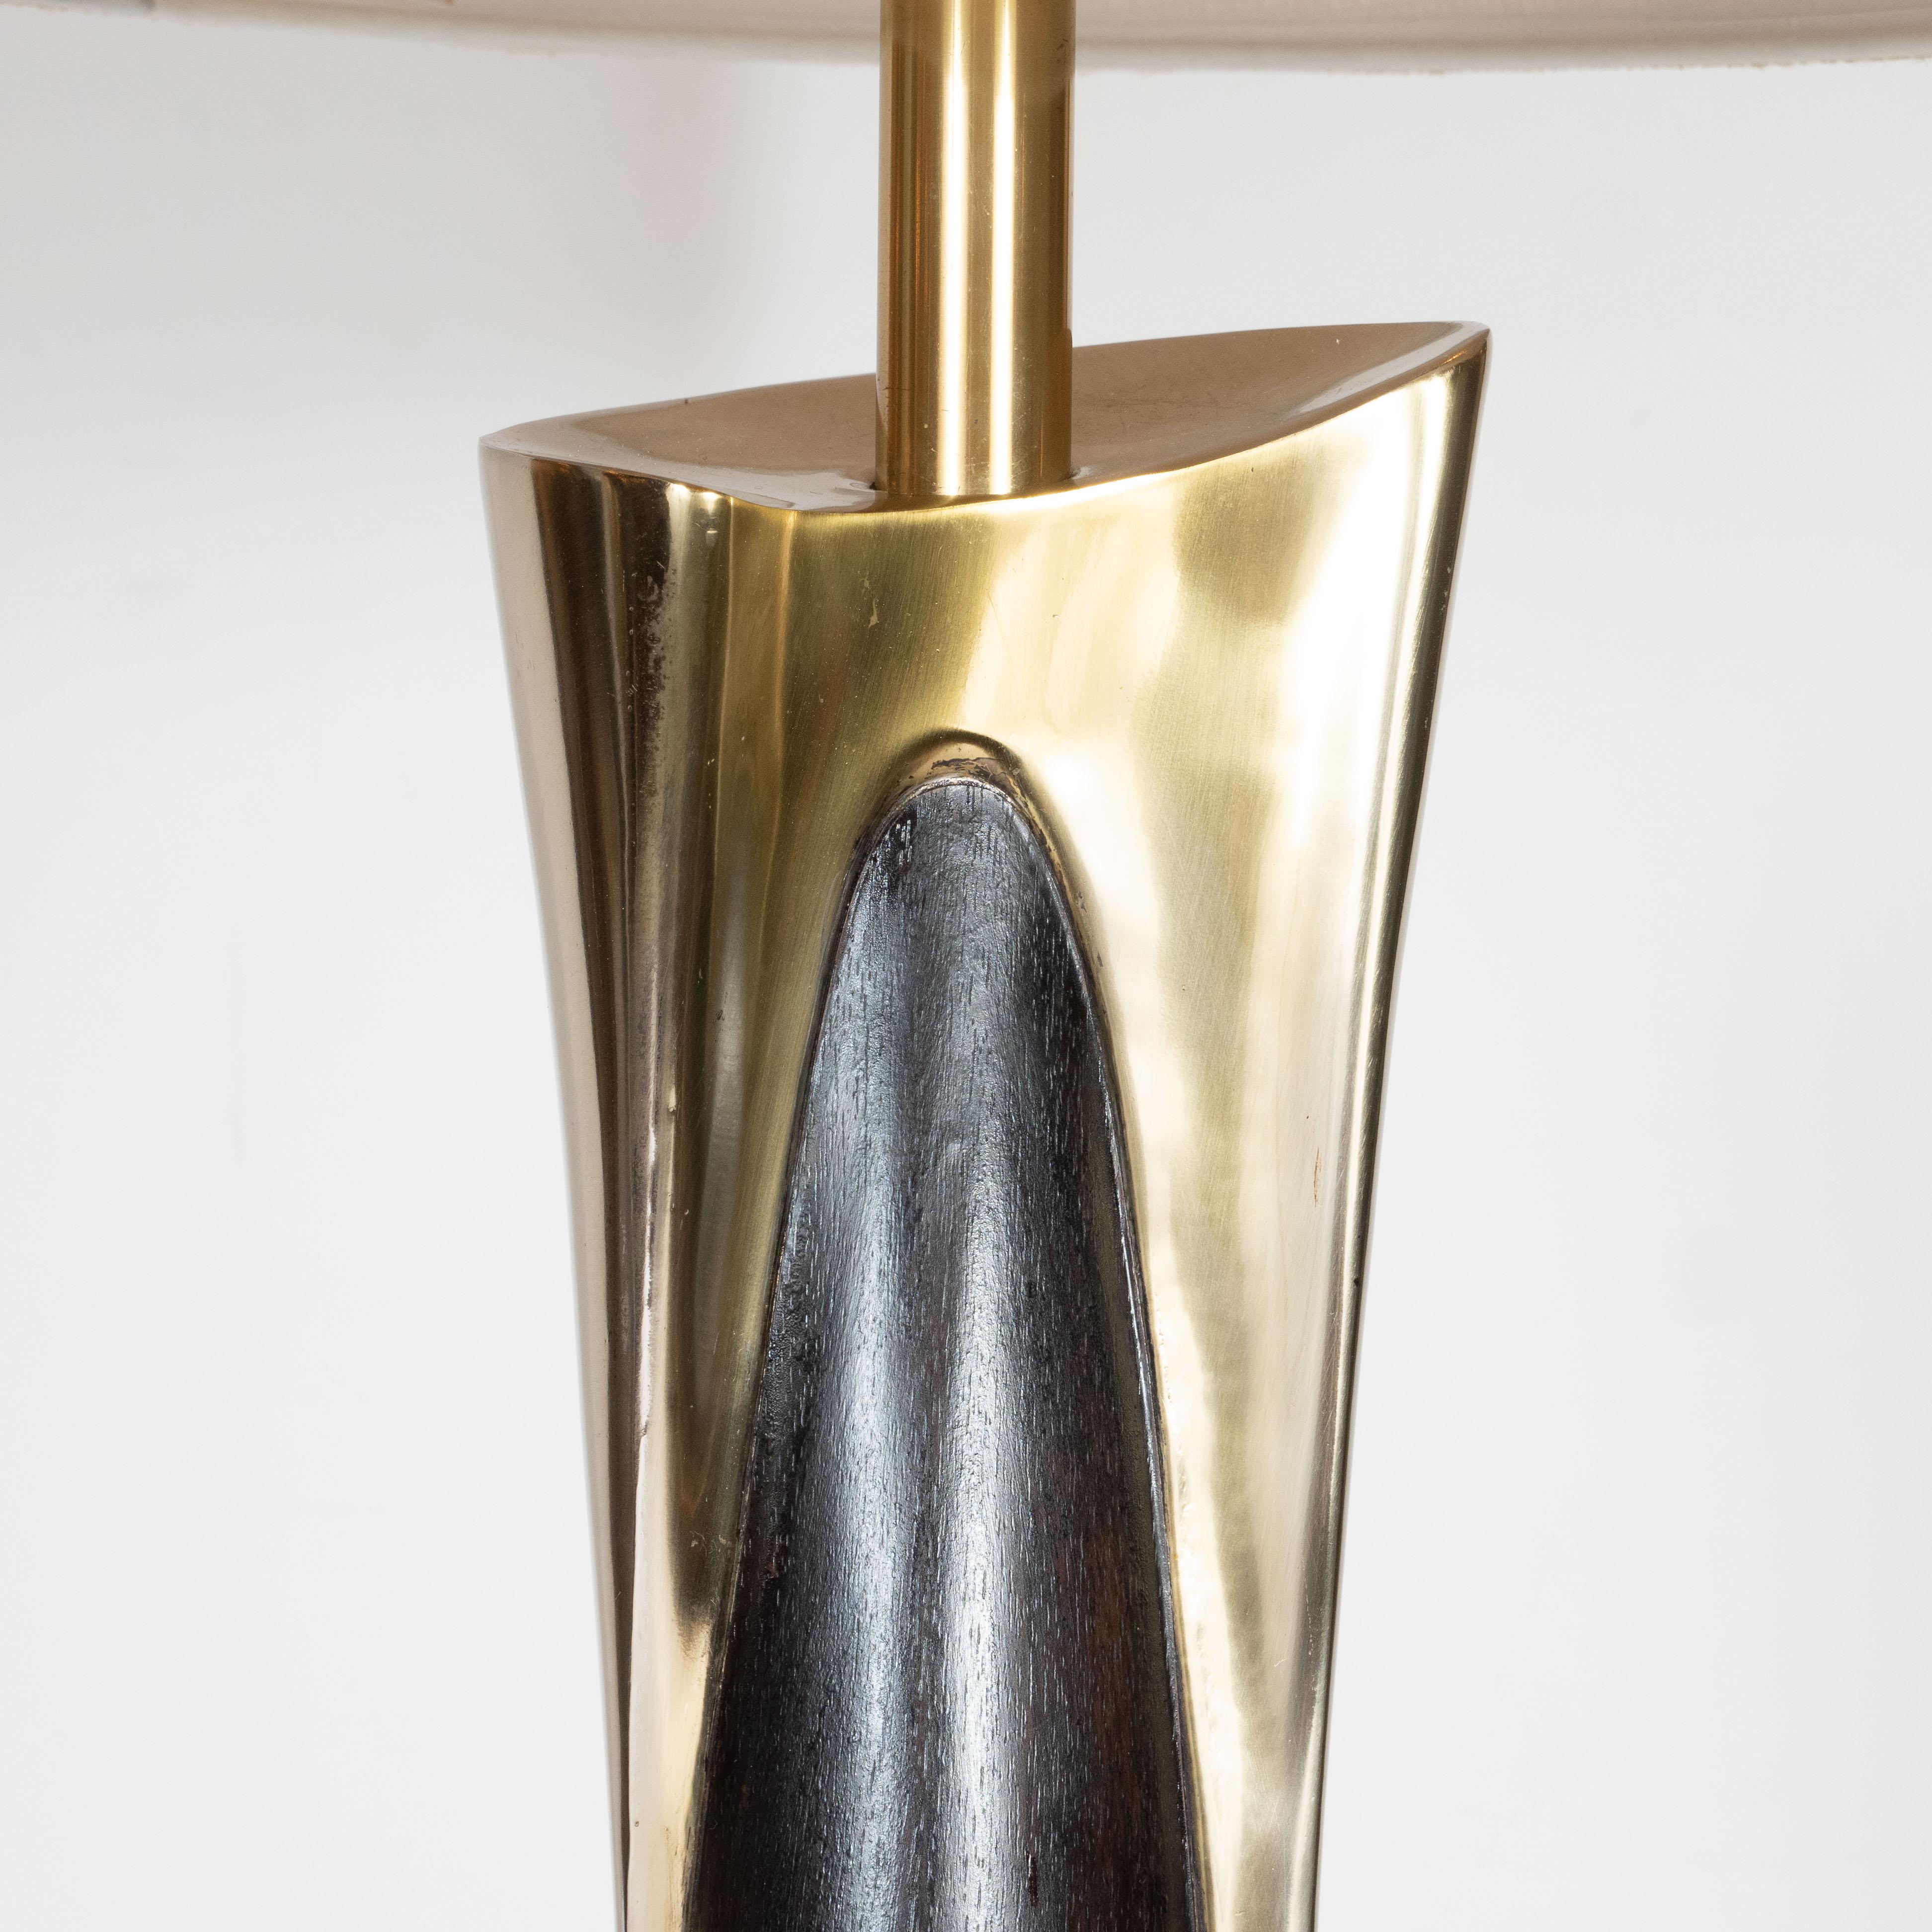 American Pair of Midcentury Brass and Ebonized Walnut Table Lamps by Laurel & Co.